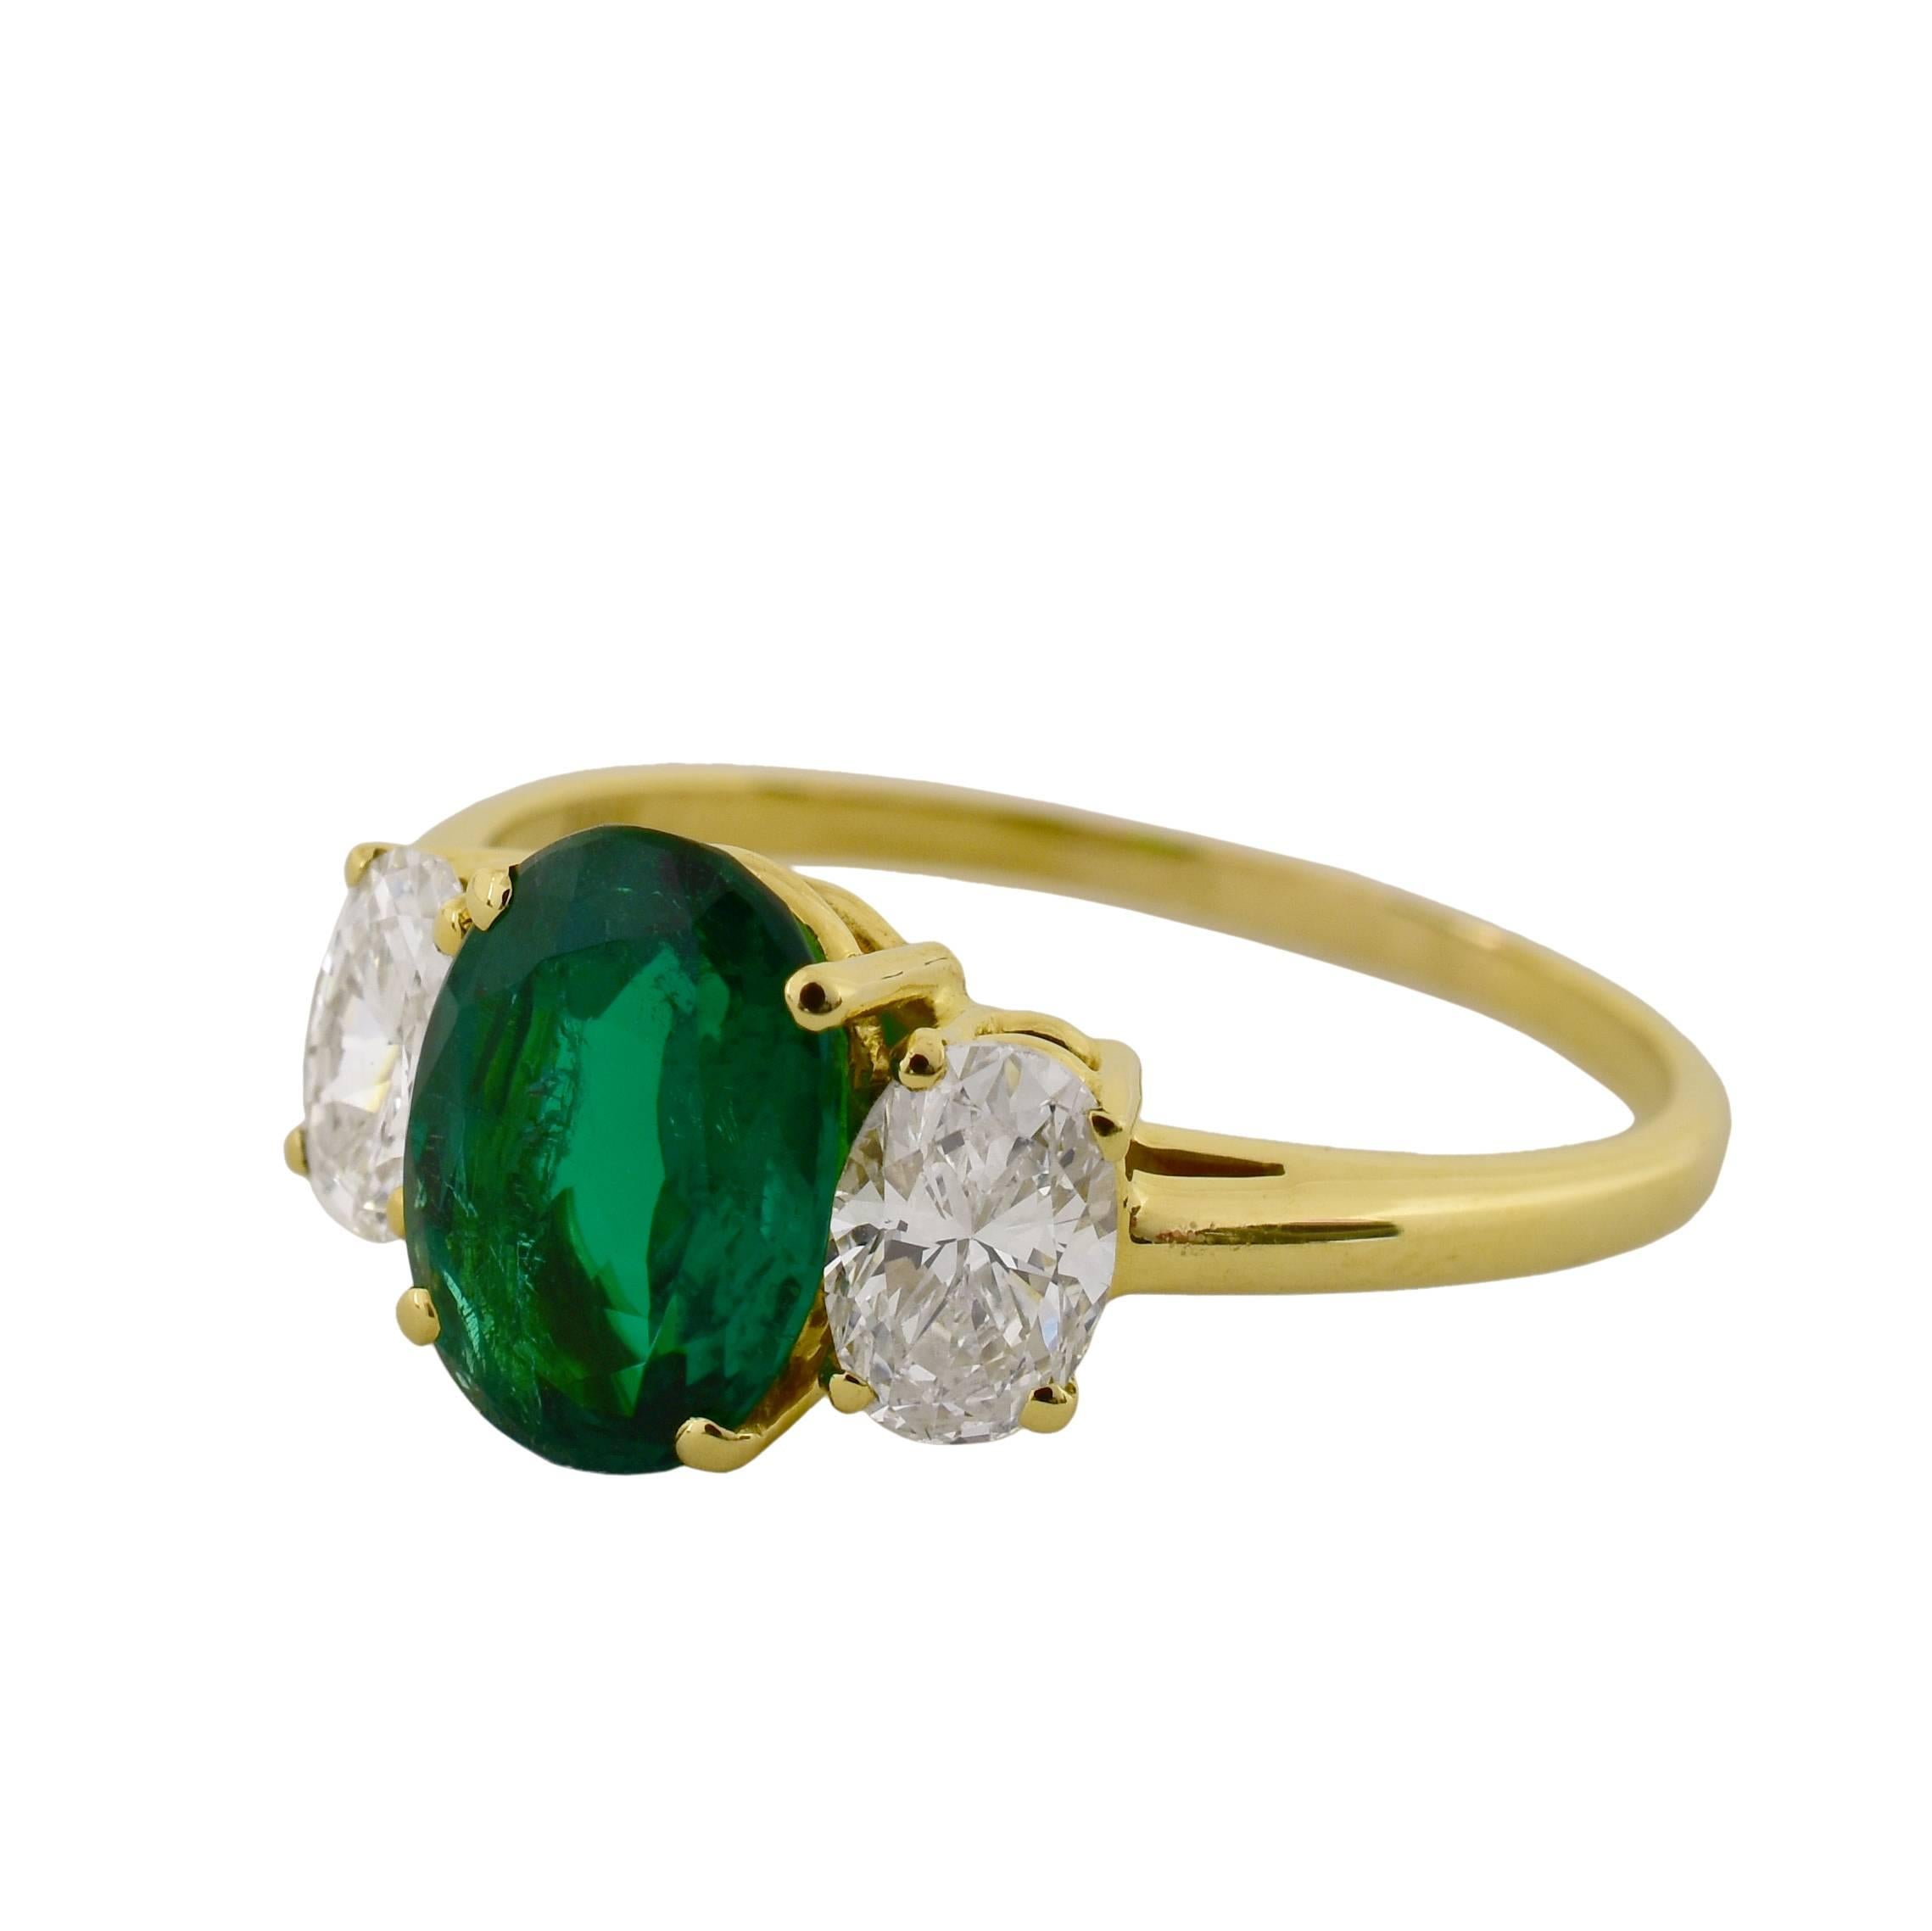 18k yellow gold ring features a 1.67ct Oval Cut Zambian Emerald and 0.84cts of G VS Oval Cut Diamonds.